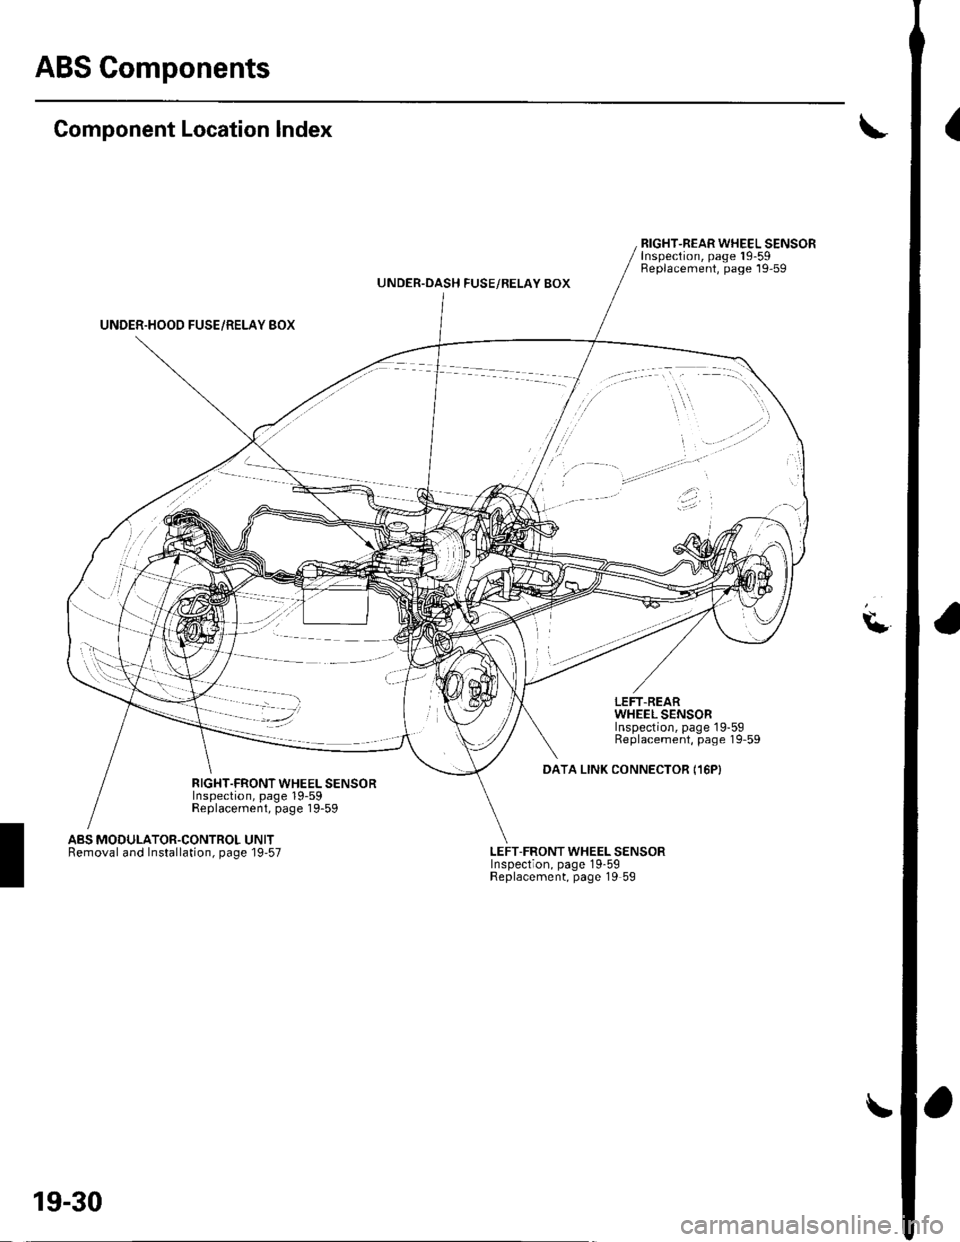 HONDA CIVIC 2003 7.G Workshop Manual ABS Gomponents
(Component Location Index
UNDER.HOOD FUSE/RELAY BOX
RIGHT-REAR WHEEL SENSORInspection, page 19-59Replacement, page 19-59UNDER.OASH FUSE/RELAY BOX
\L
LEFT.REARWHEEL SENSORInspection, pag